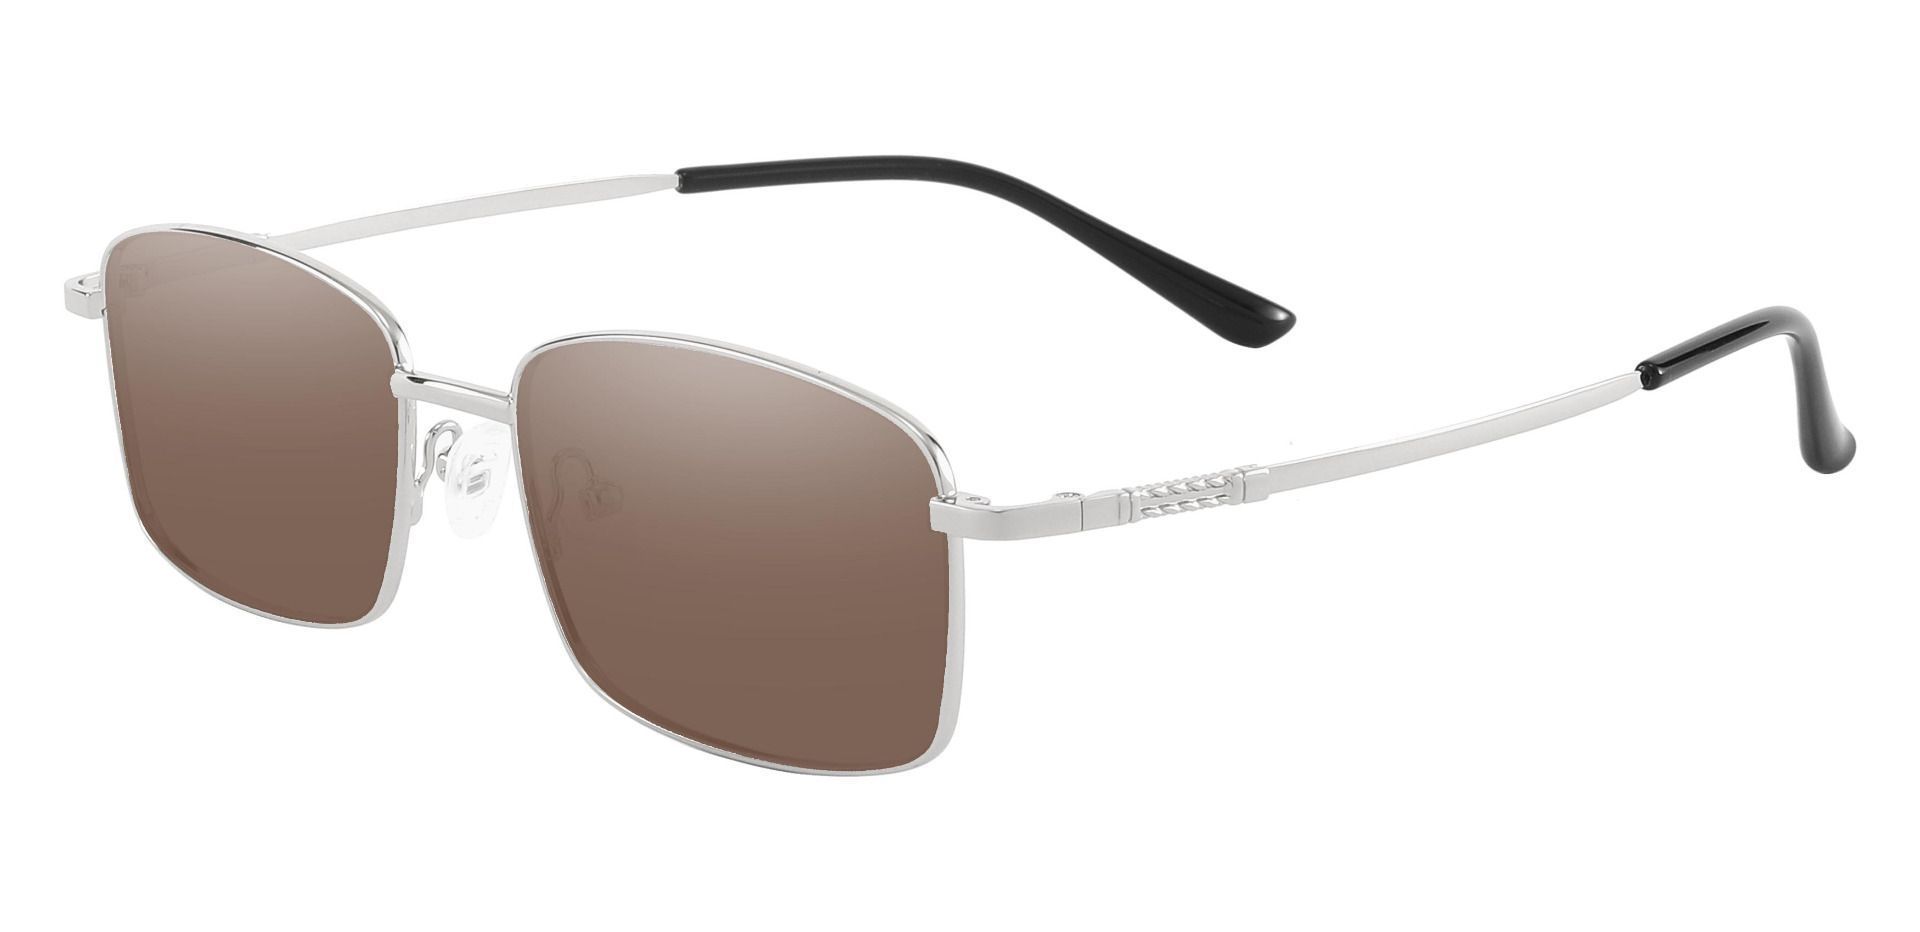 Clyde Rectangle Progressive Sunglasses - Silver Frame With Brown Lenses